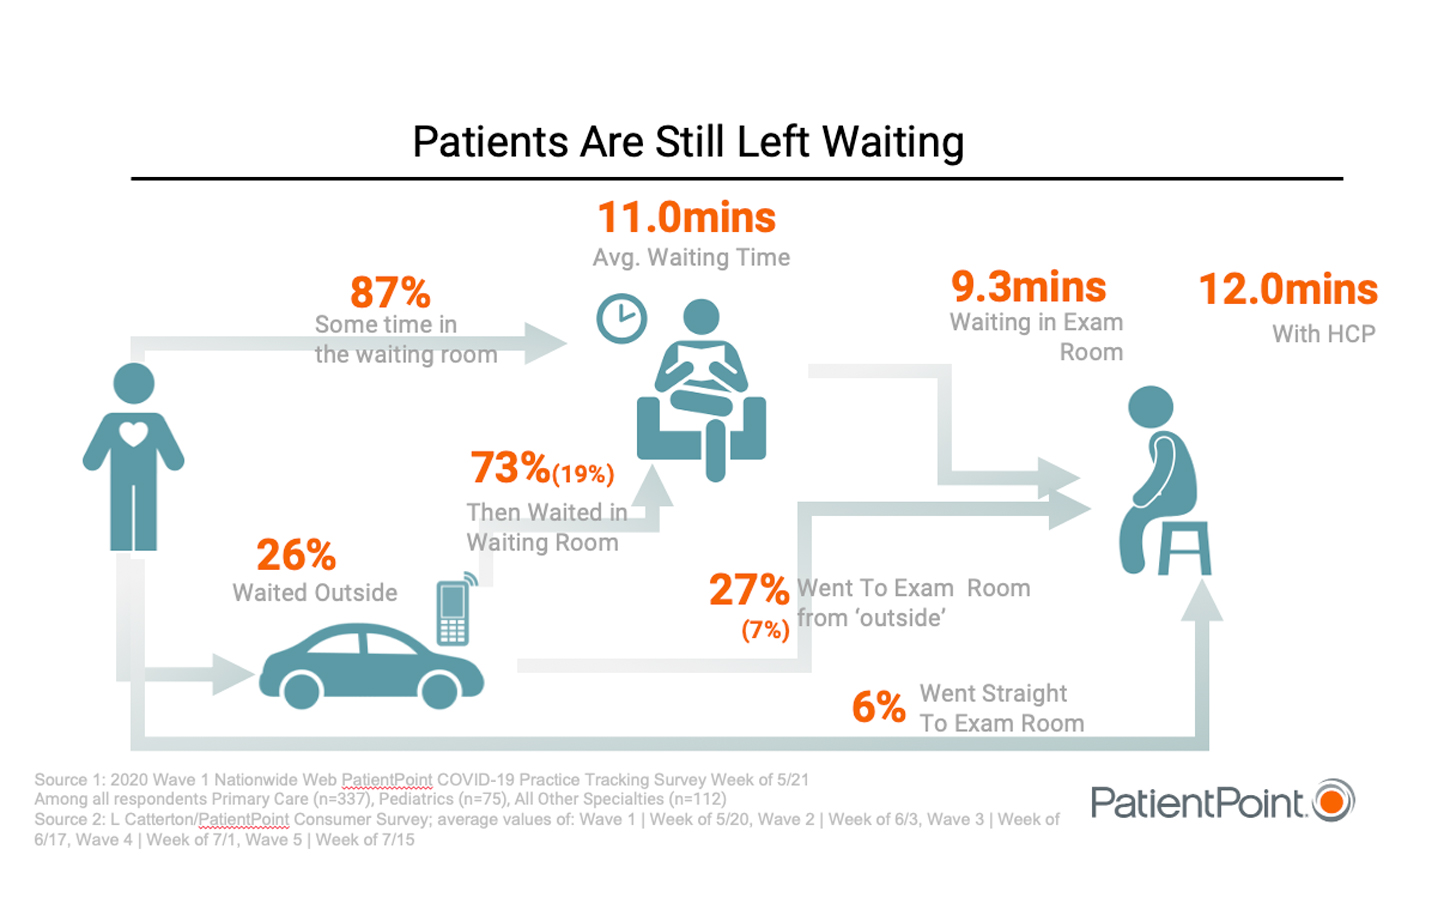 A graphic reflecting that 87% of patients are spending time in the waiting room.